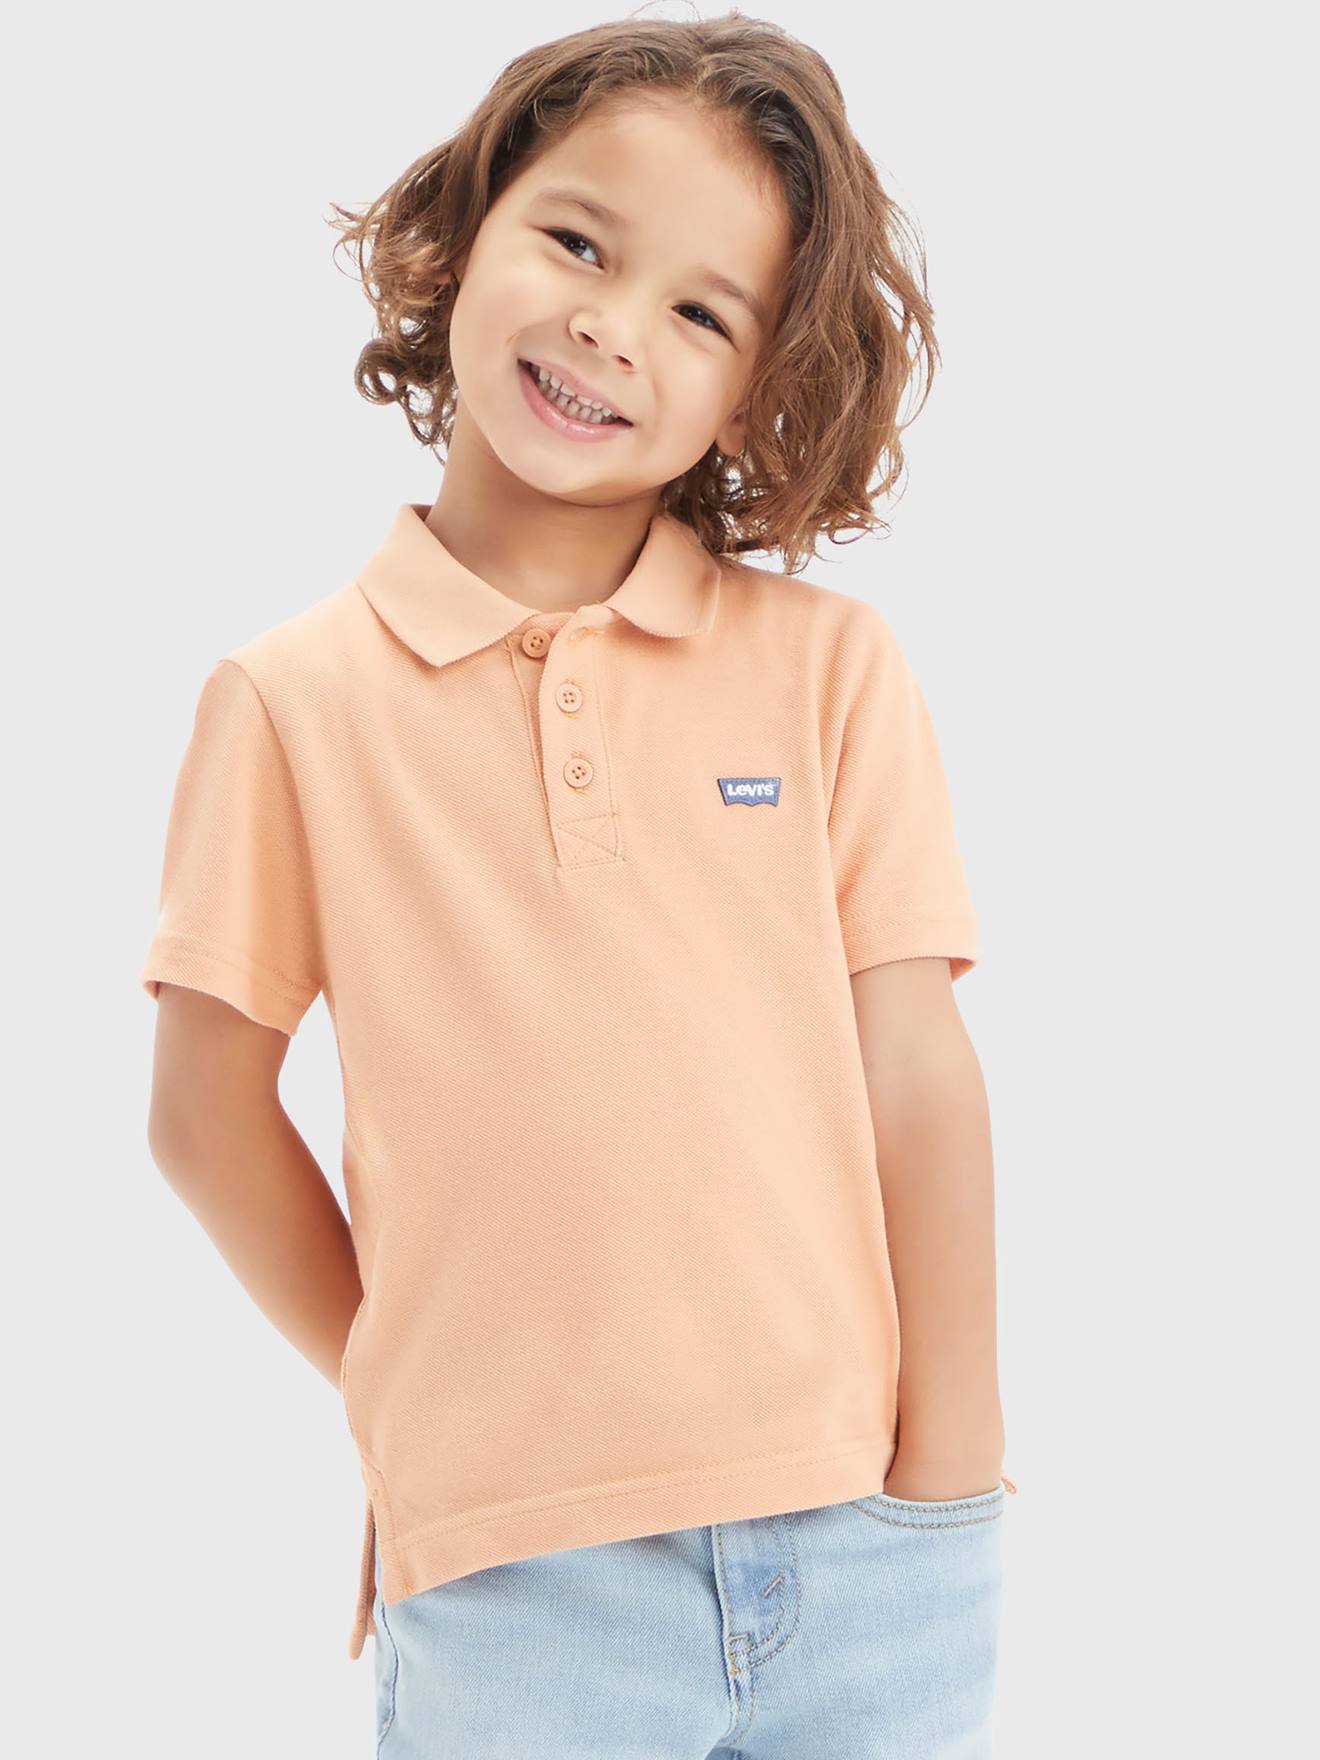 Polo Shirt by Levi’s(r) for Boys orange